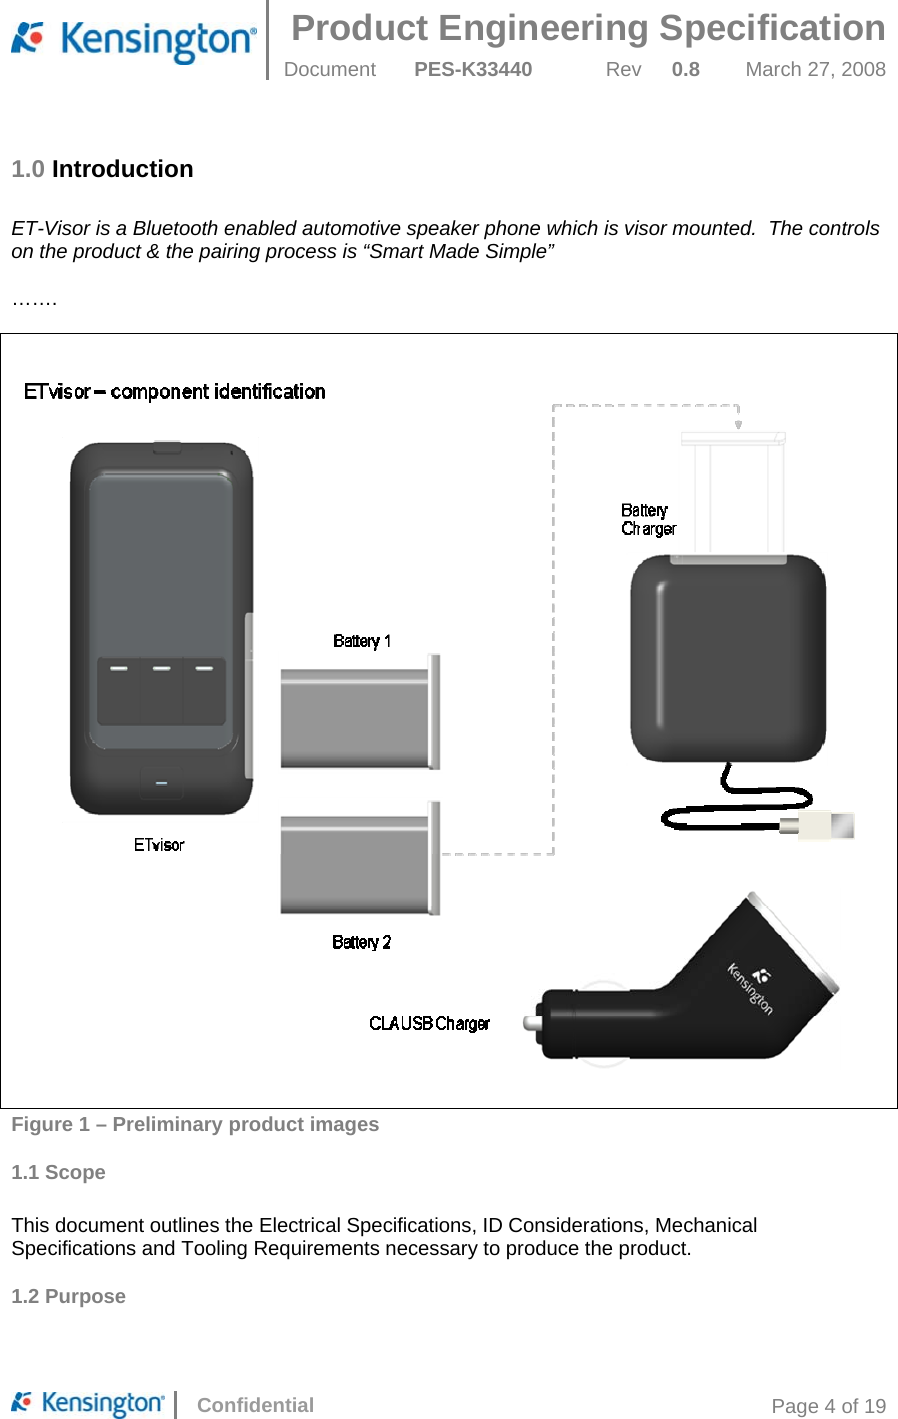 Product Engineering Specification  Document  PES-K33440 Rev 0.8 March 27, 2008      Confidential  Page 4 of 19 1.0 Introduction  ET-Visor is a Bluetooth enabled automotive speaker phone which is visor mounted.  The controls on the product &amp; the pairing process is “Smart Made Simple”  …….       Figure 1 – Preliminary product images 1.1 Scope  This document outlines the Electrical Specifications, ID Considerations, Mechanical Specifications and Tooling Requirements necessary to produce the product. 1.2 Purpose  